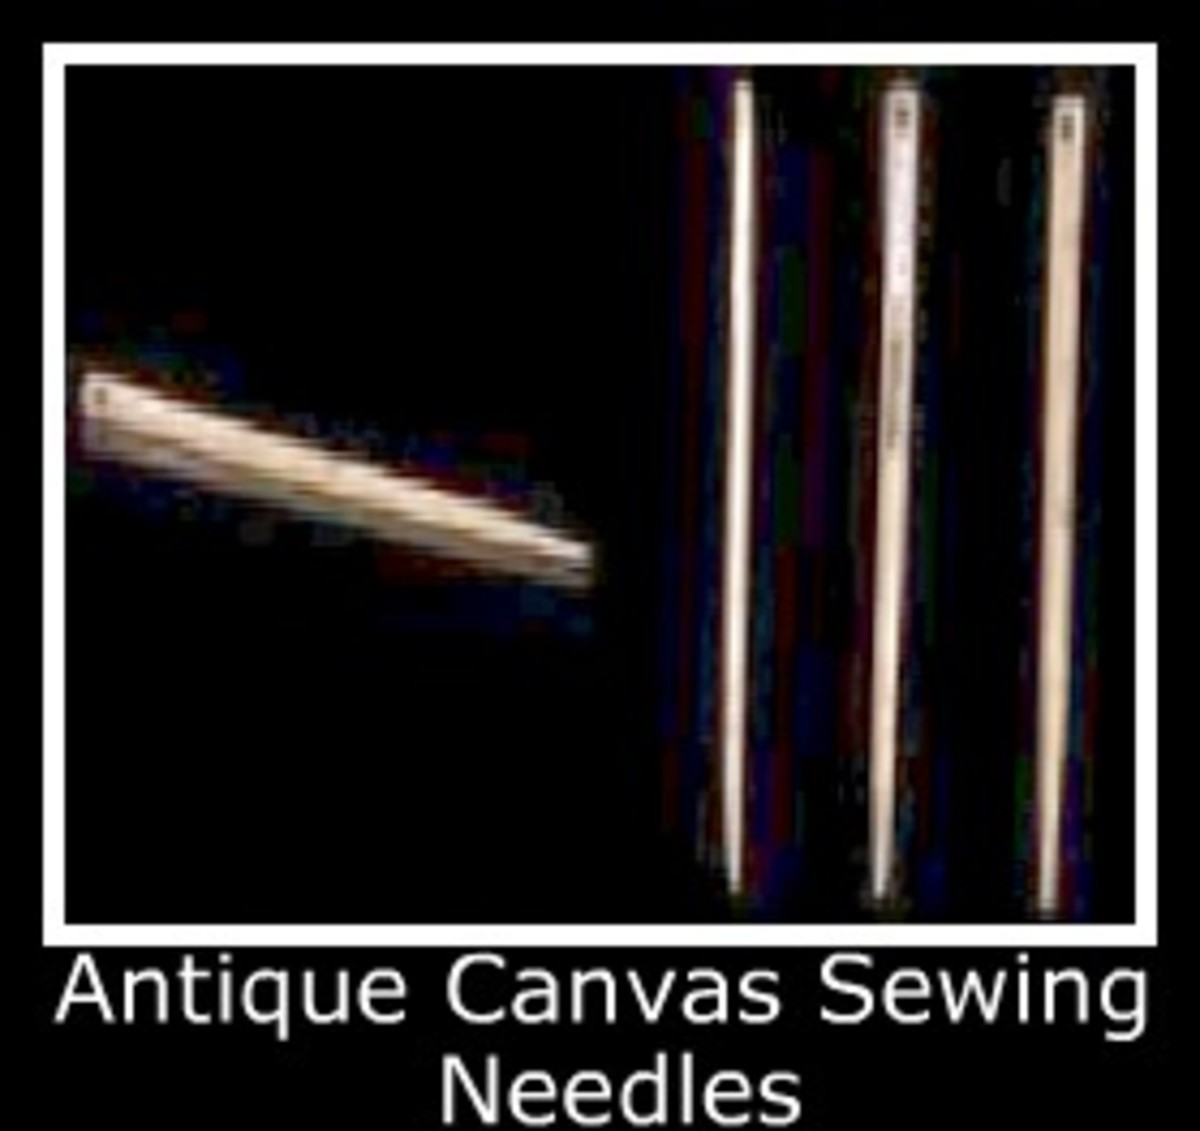 Hand sewing Needles--- An Illustrated Guide to the Types and Uses of Hand Sewing Needles